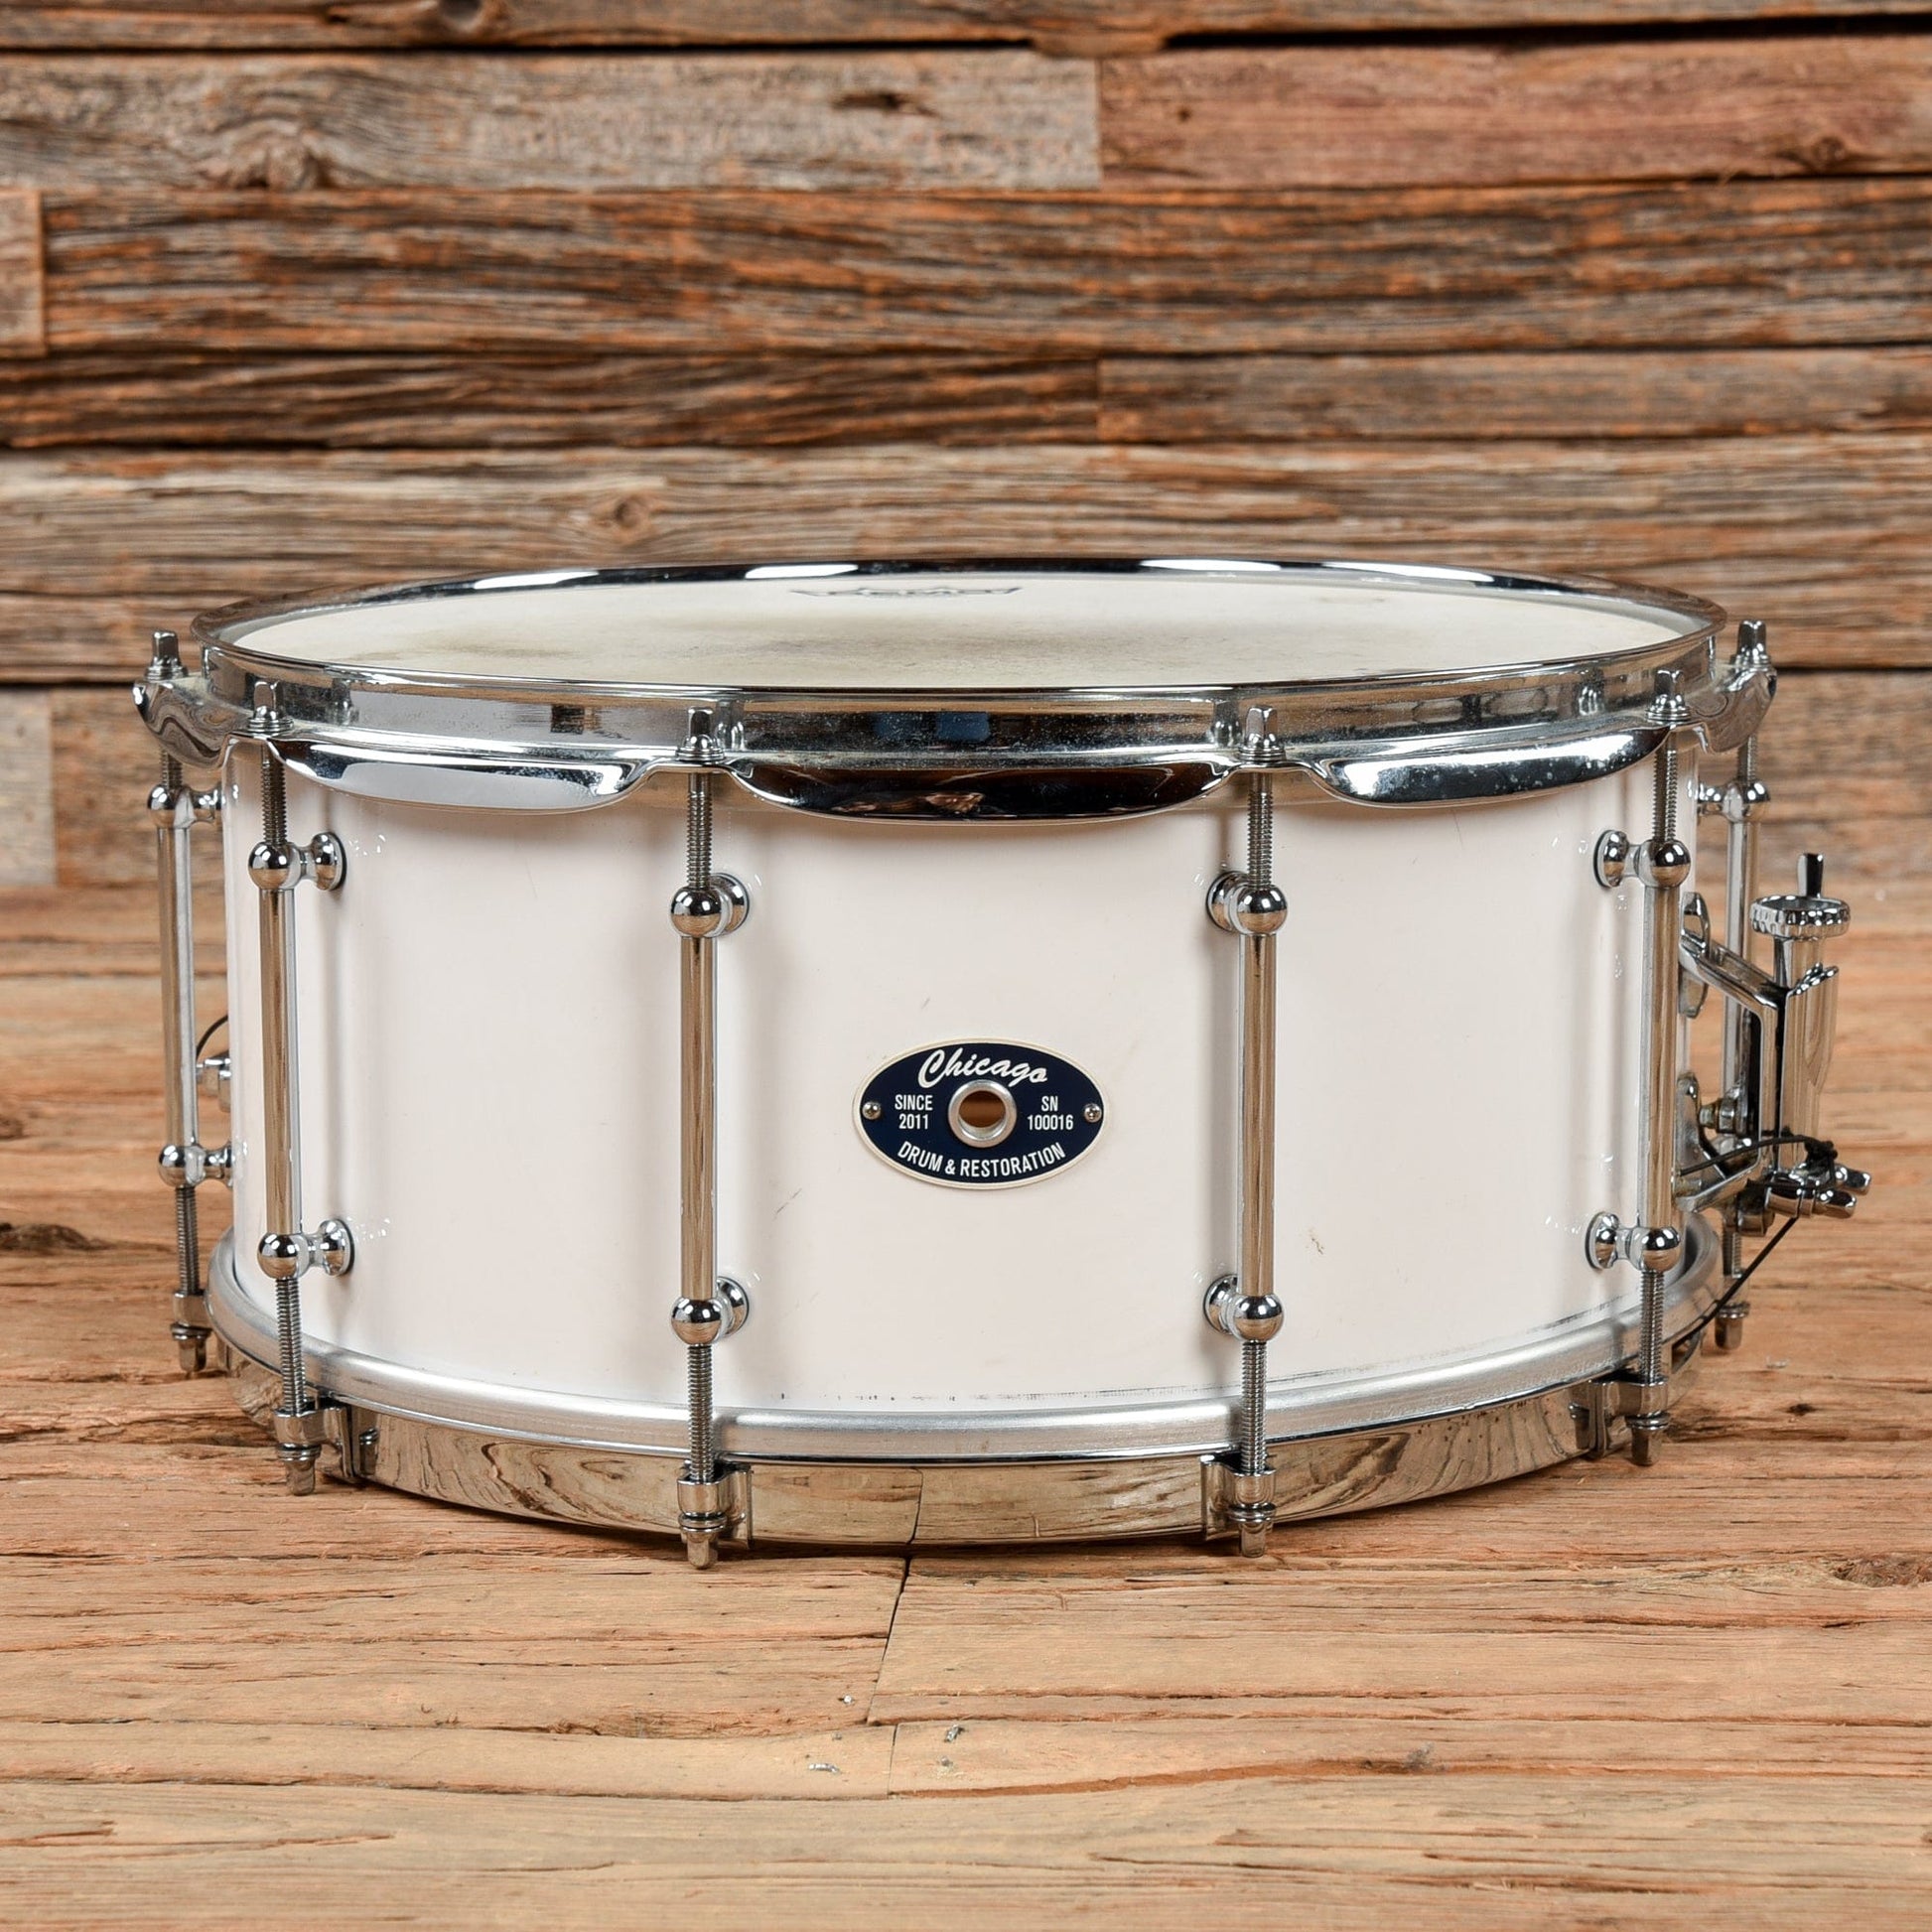 Chicago 6.5x14 Heritage Series Snare Drum USED Drums and Percussion / Acoustic Drums / Snare